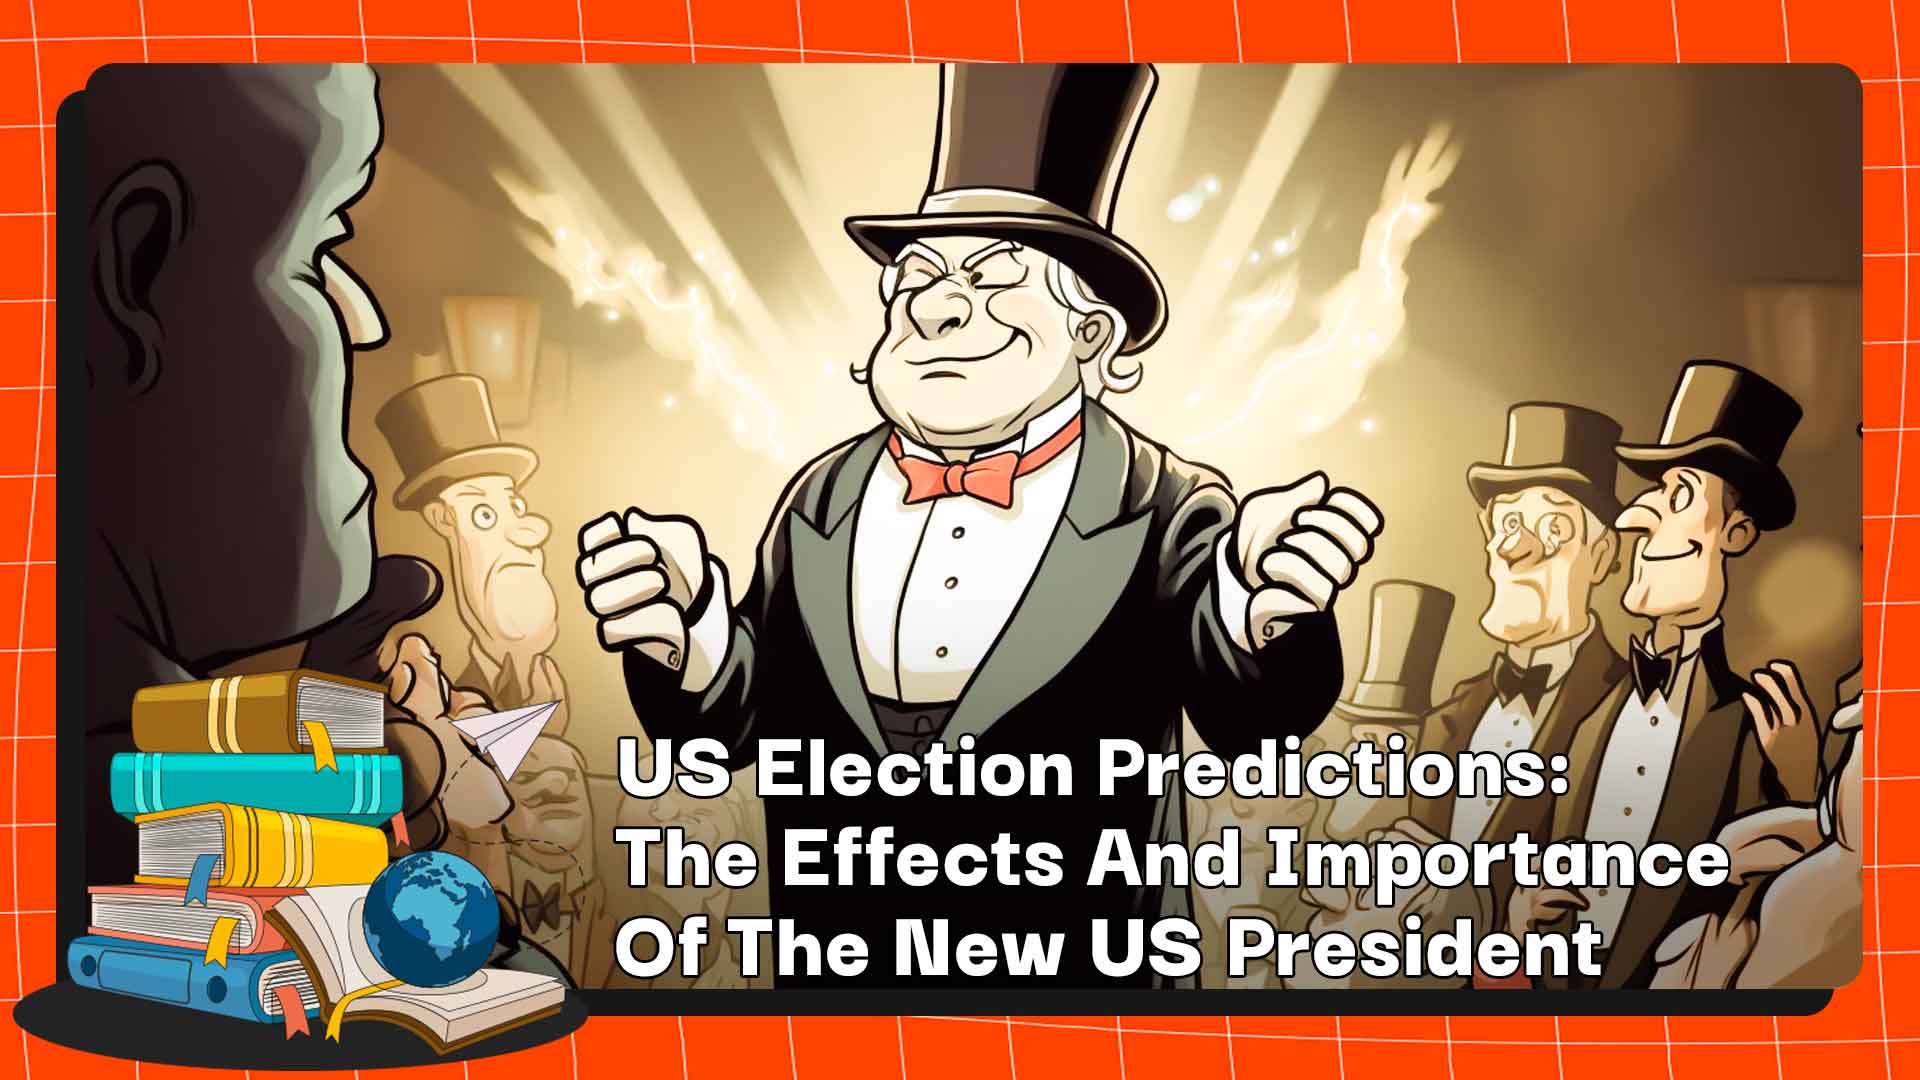 US Election Predictions: The Effects And Importance Of The New US President